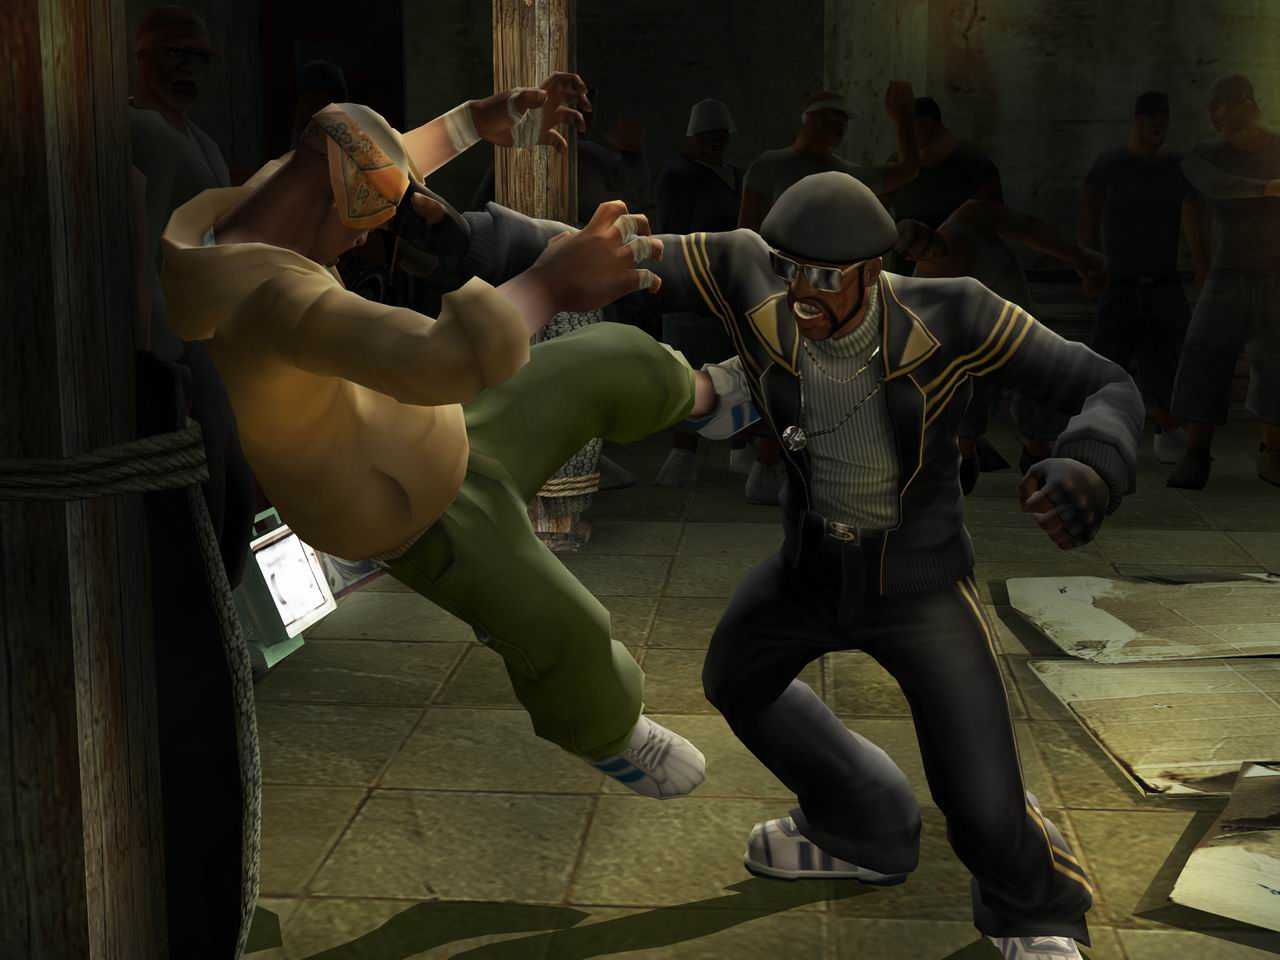 Игры PLAYSTATION 2 Def Jam: Fight for NY. Def Jam Fight for NY. Def Jam ps2. Def Jam игра. Игра били 2